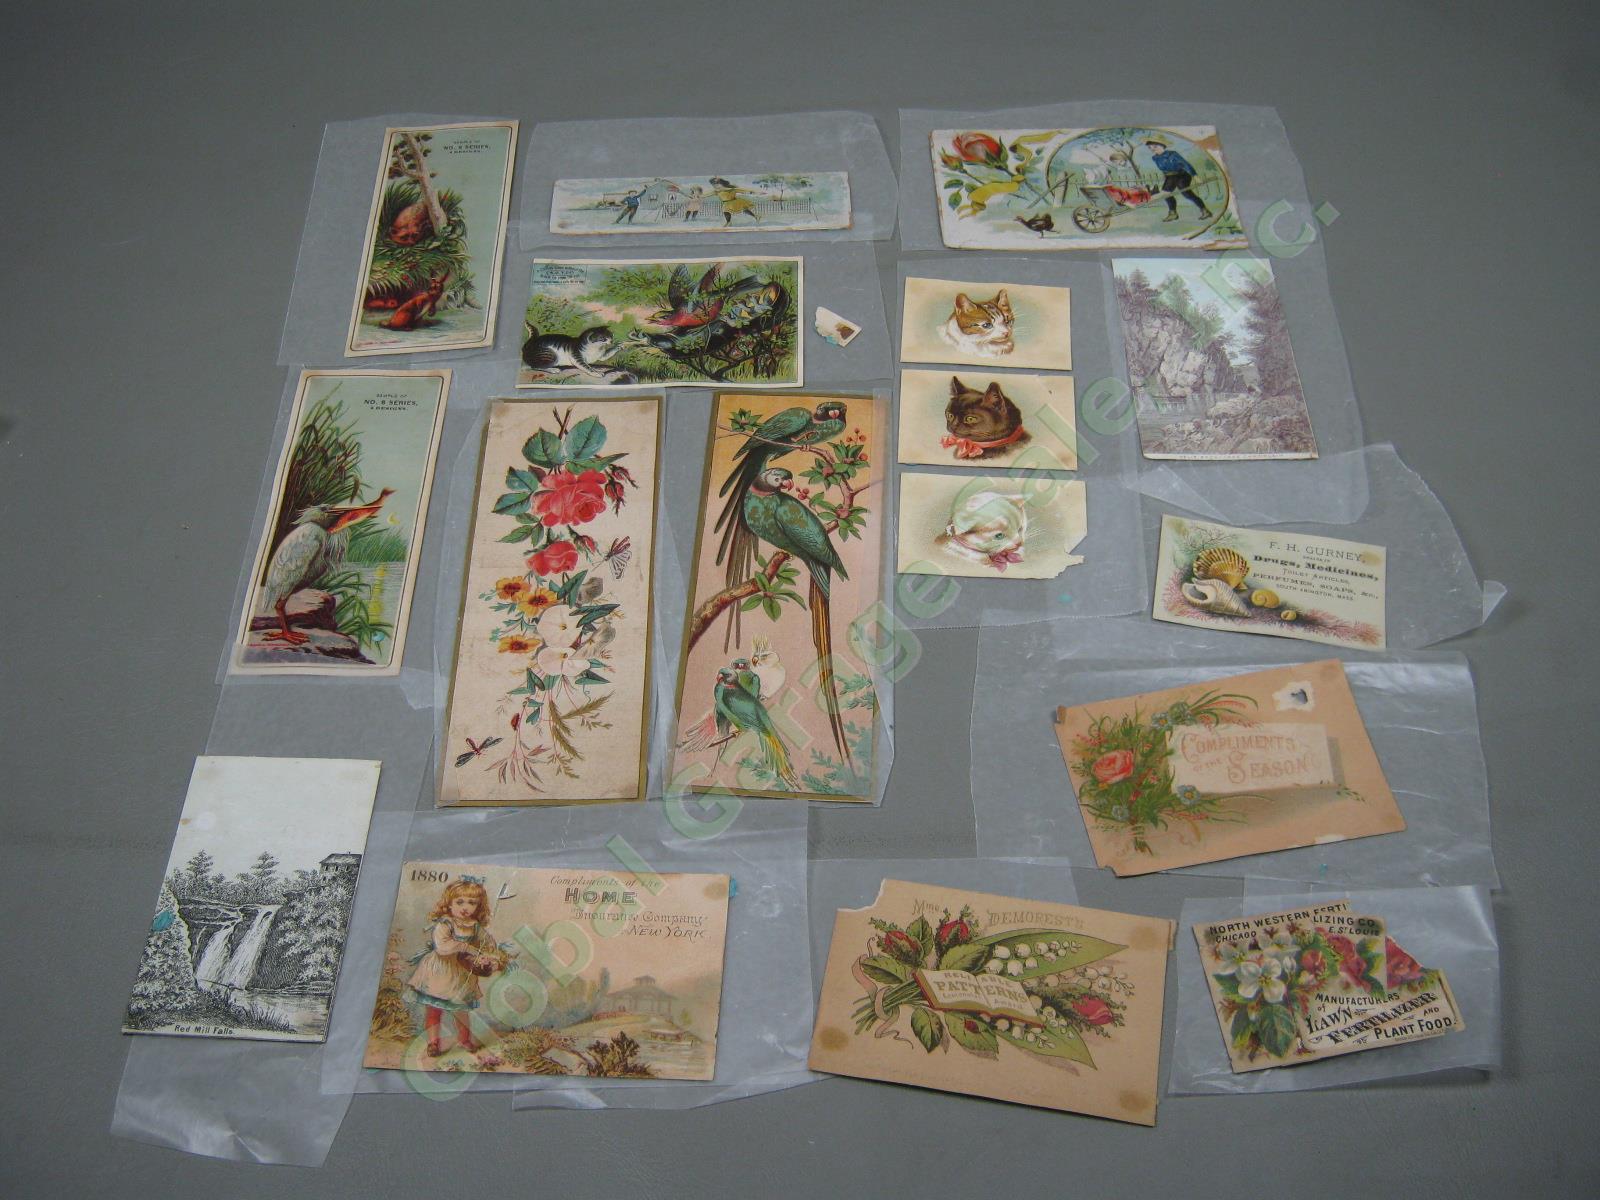 Huge Lot Assorted Vintage Antique Victorian Advertising Trade Cards Collection + 13